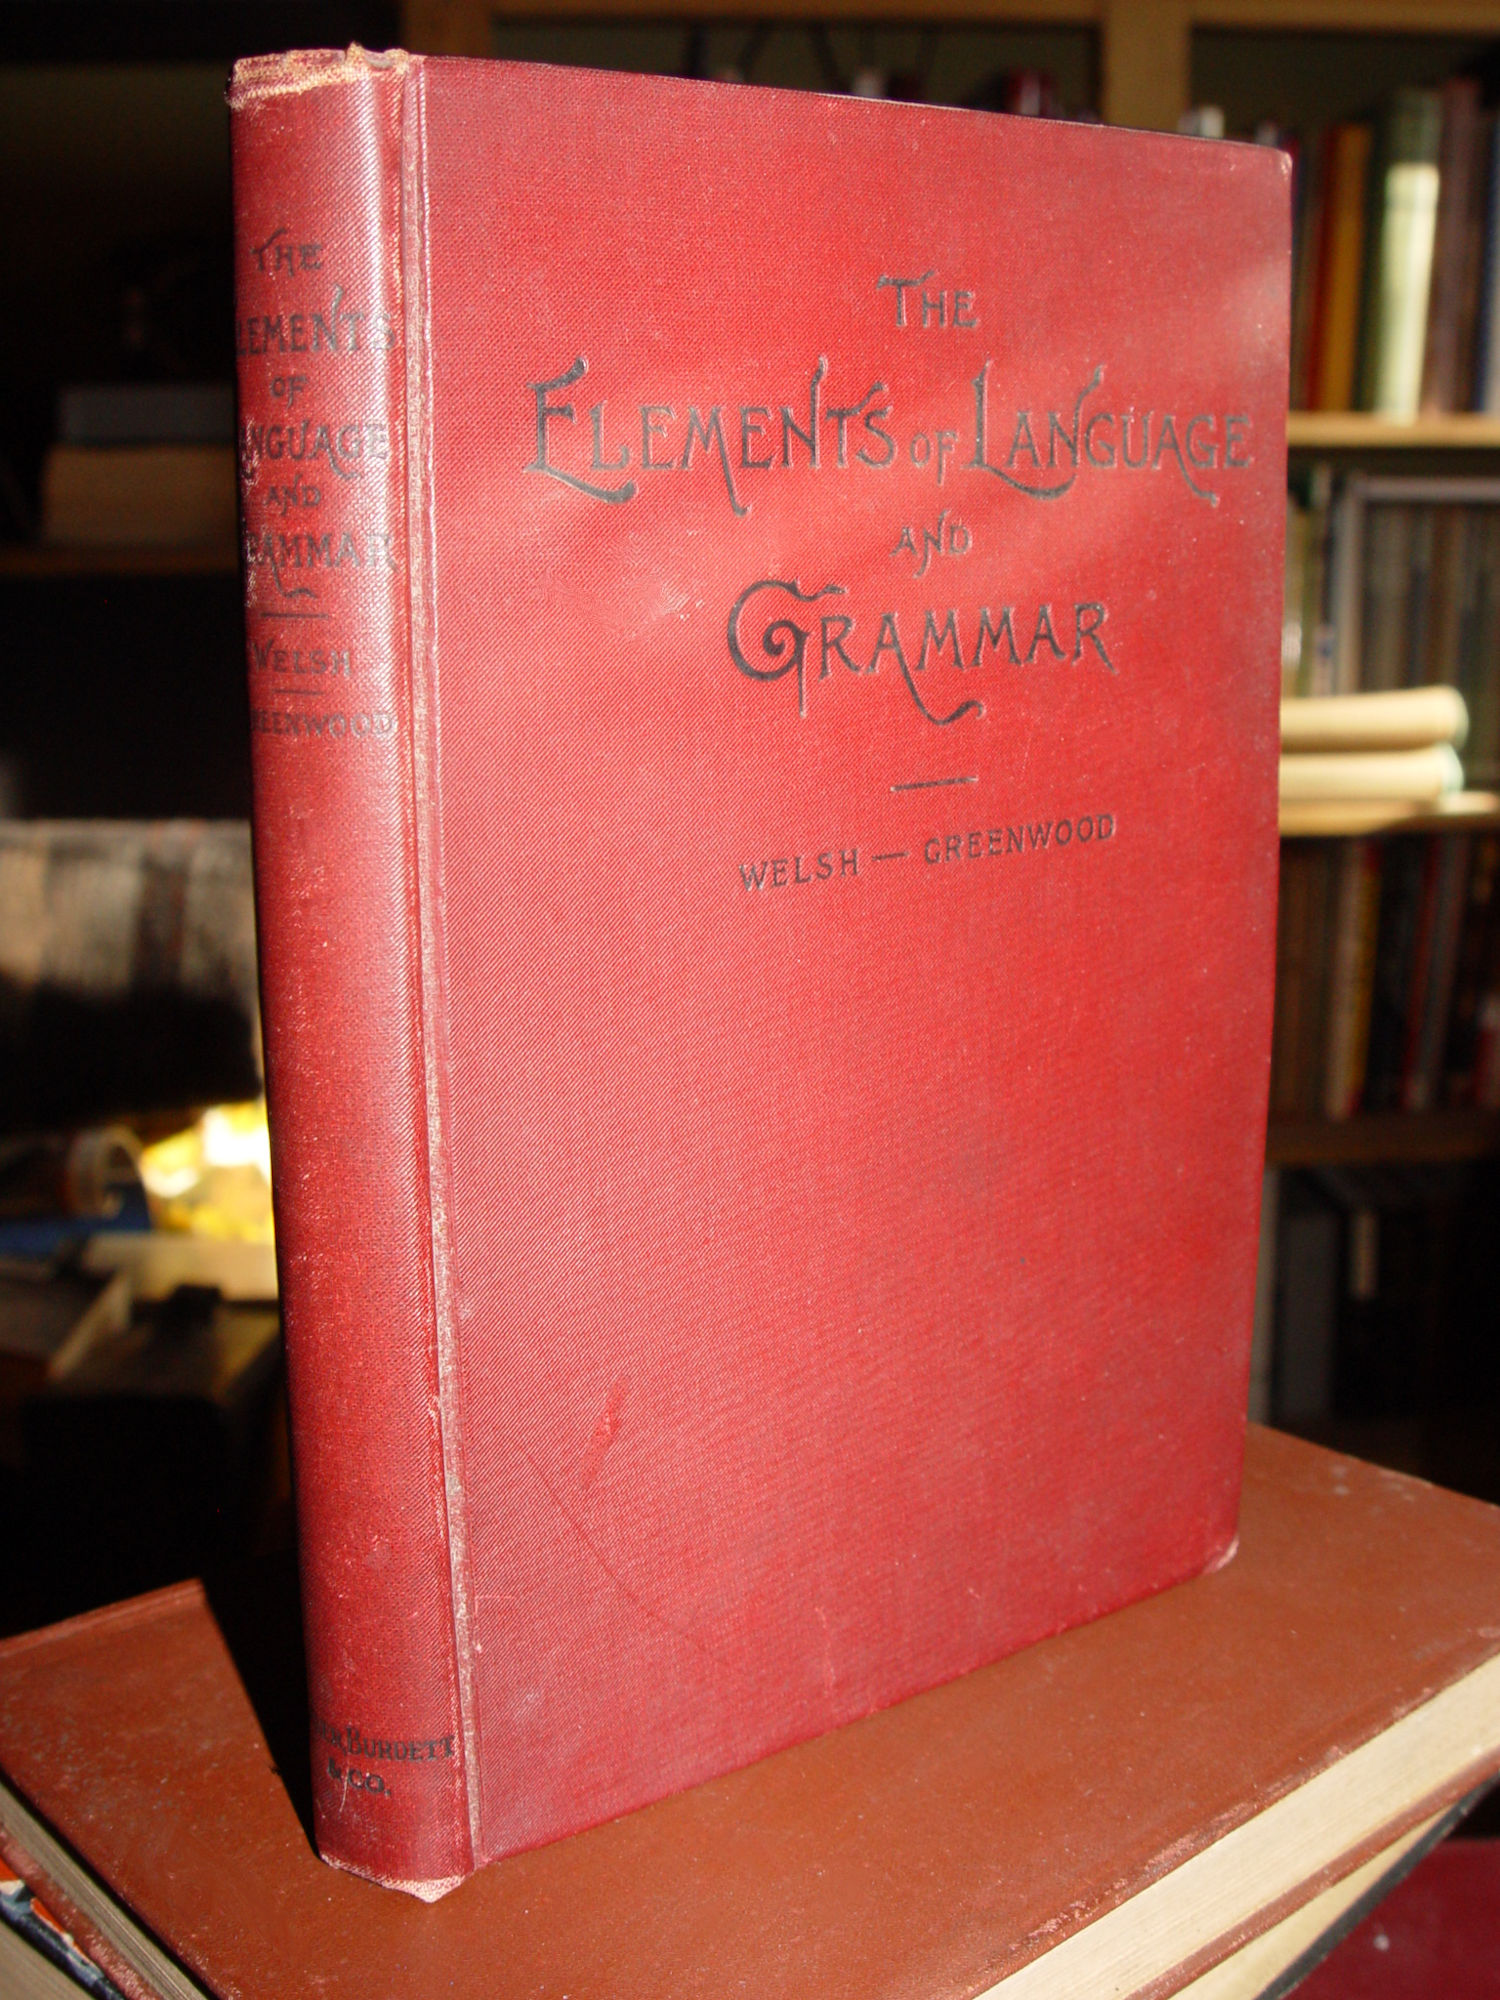 The
                Elements of Language and Grammar 1896; Alfred Hix Welsh